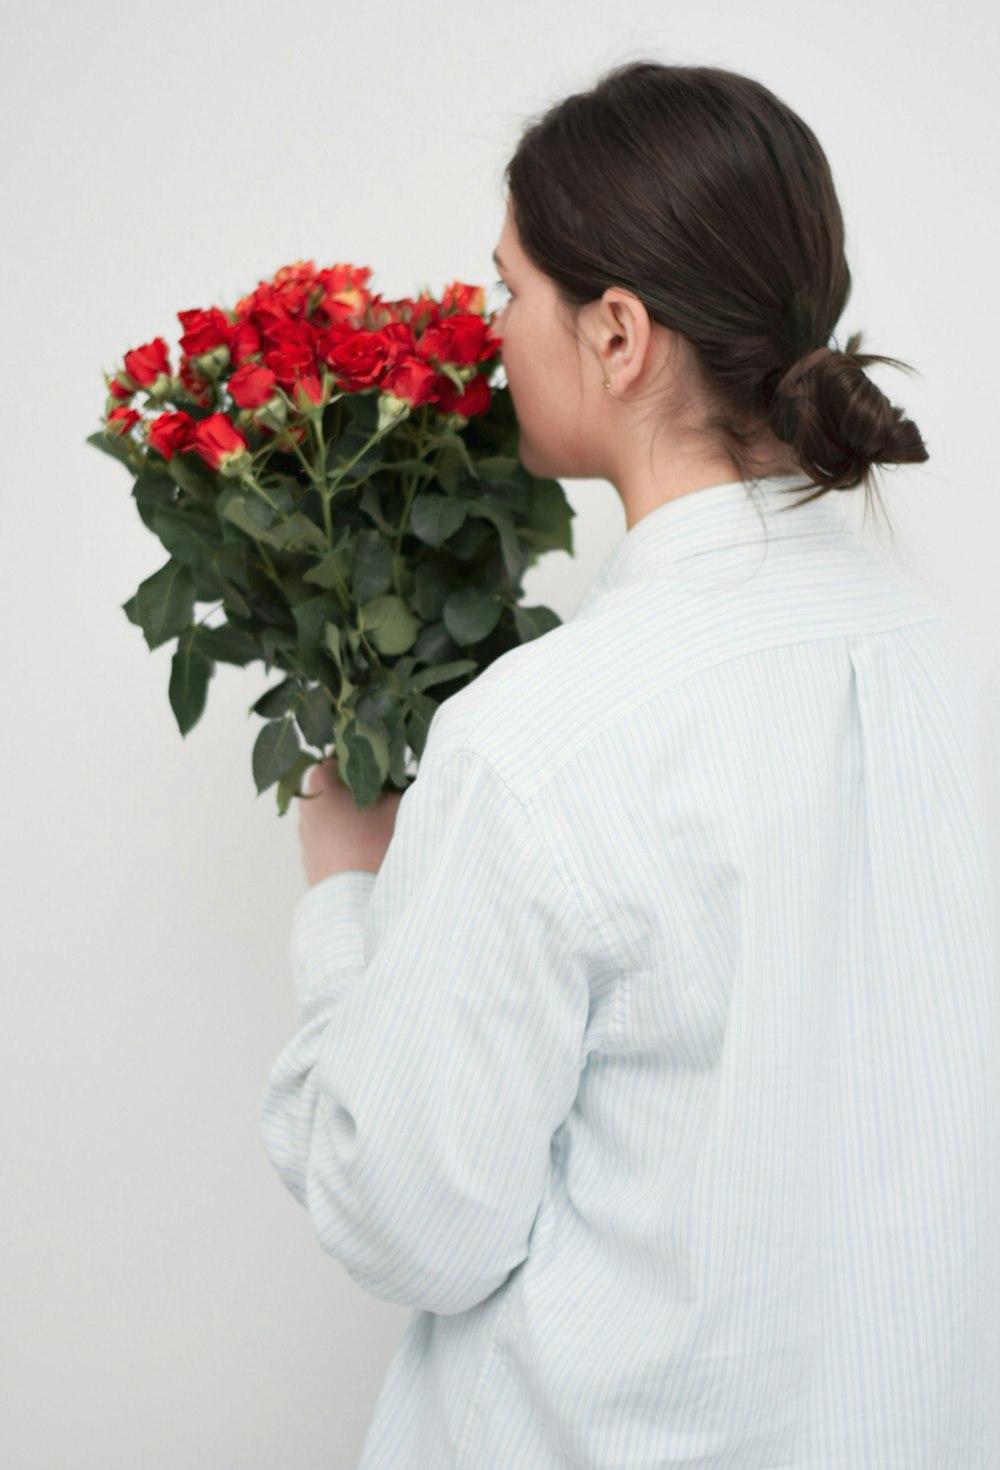 woman in white long sleeve shirt holding red rose bouquet